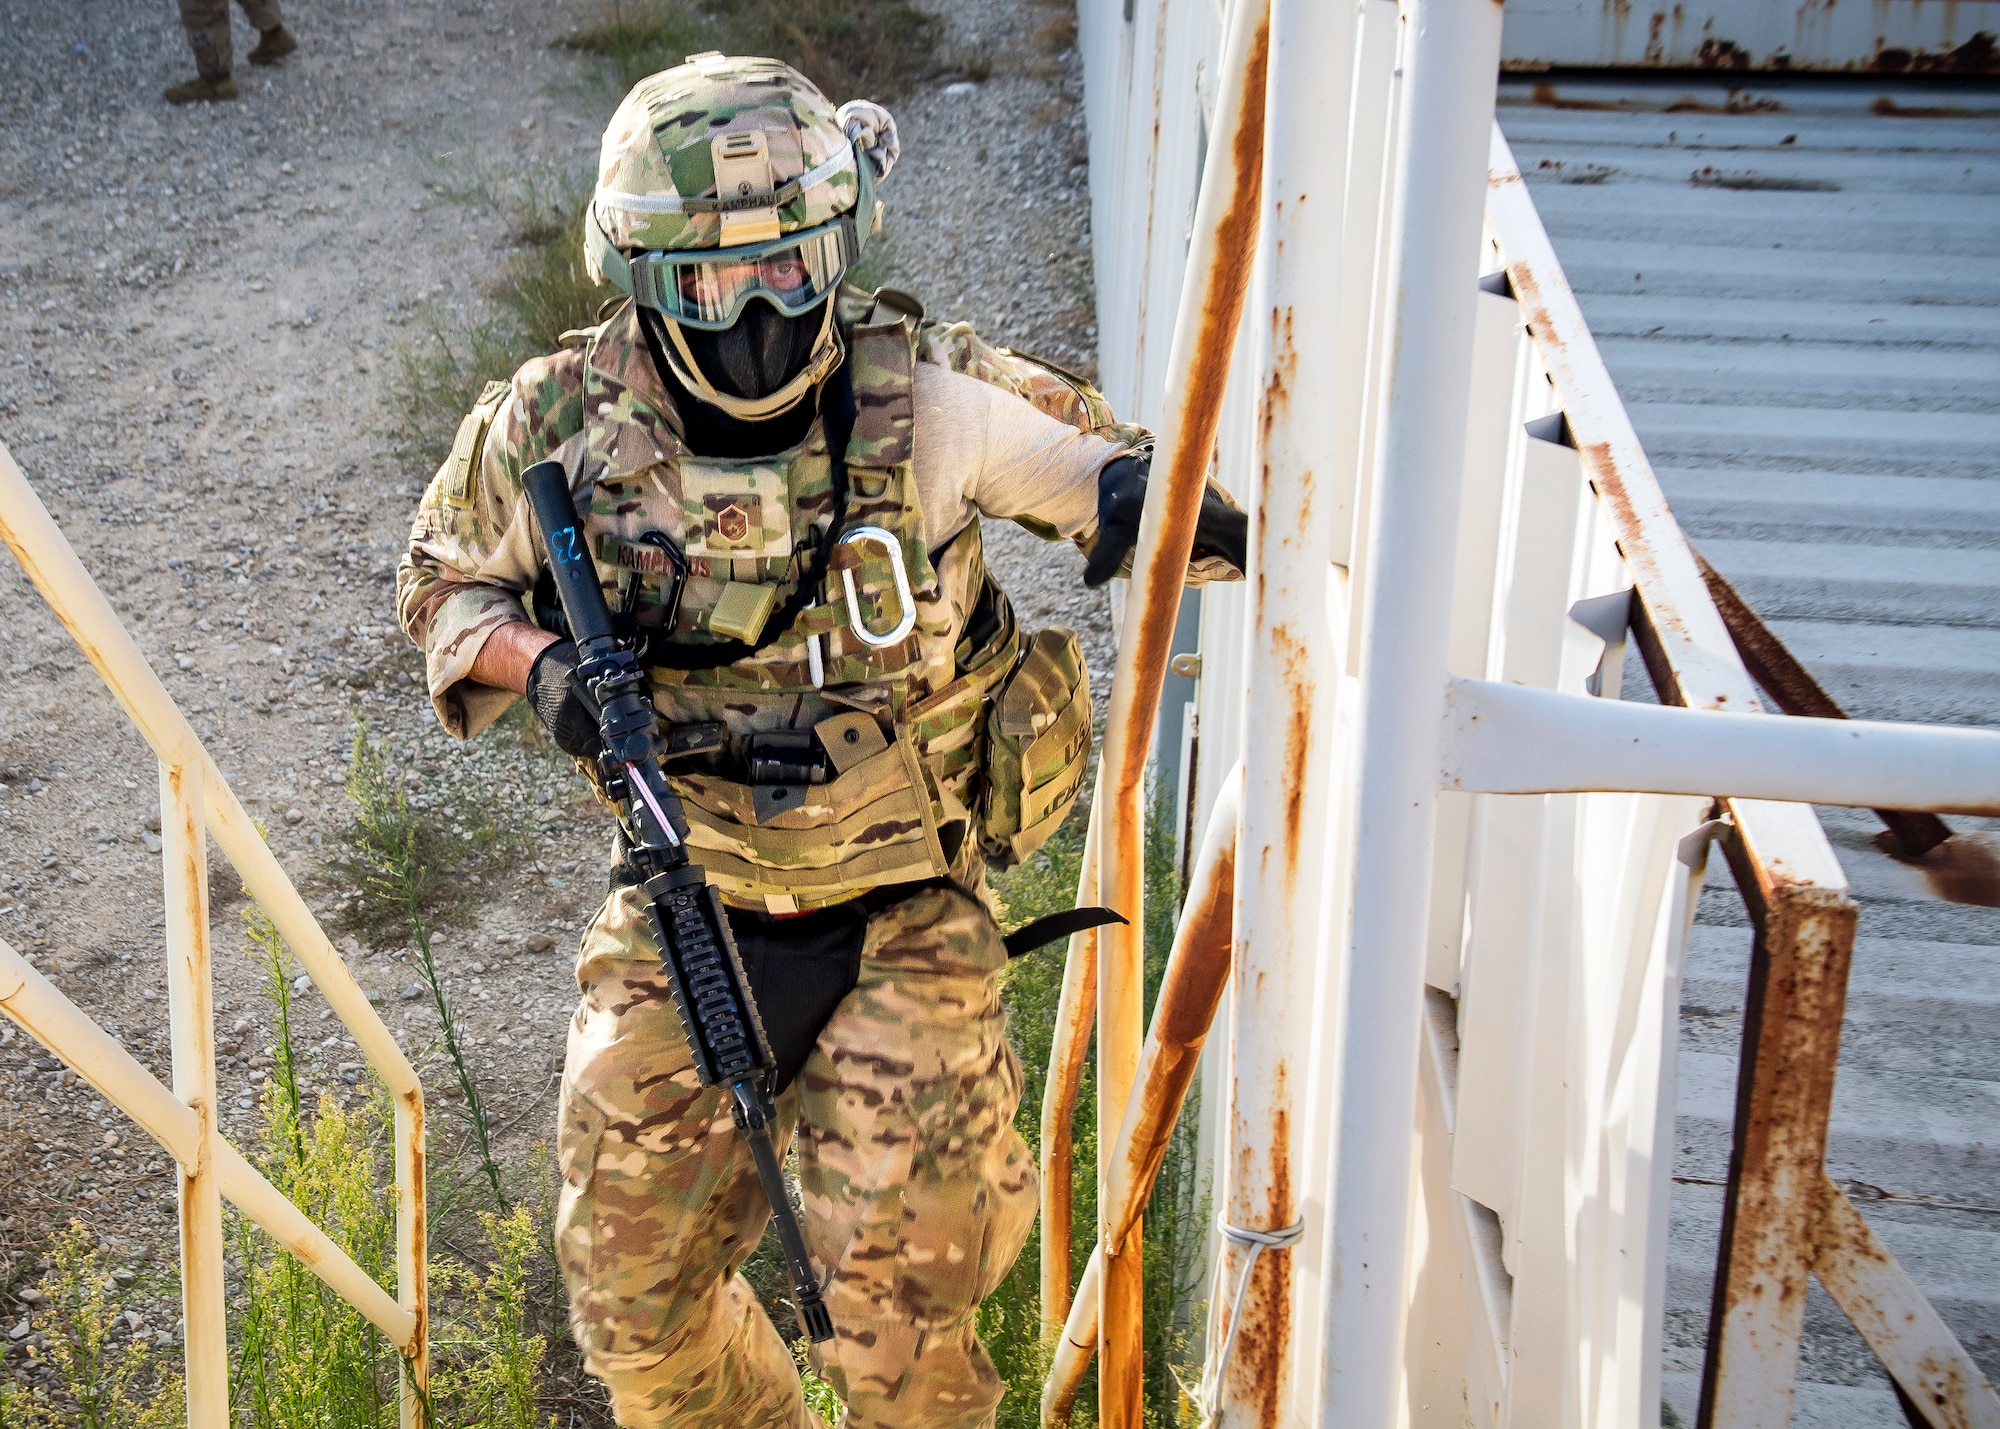 Master Sgt. James Kamphaus, 3d Weather Squadron mission support flight chief, climbs a flight of stairs during a certification field exercise (CFX), July 29, 2019, at Camp Bowie Training Center, Texas. The CFX was designed to evaluate the squadron’s overall tactical ability and readiness to provide the U.S. Army with full spectrum environmental support to the Joint Task Force (JTF) fight. The CFX immersed Airmen into all the aspects of what could come with a deployment such as force on force scenarios. (U.S. Air Force photo by Airman 1st Class Eugene Oliver)